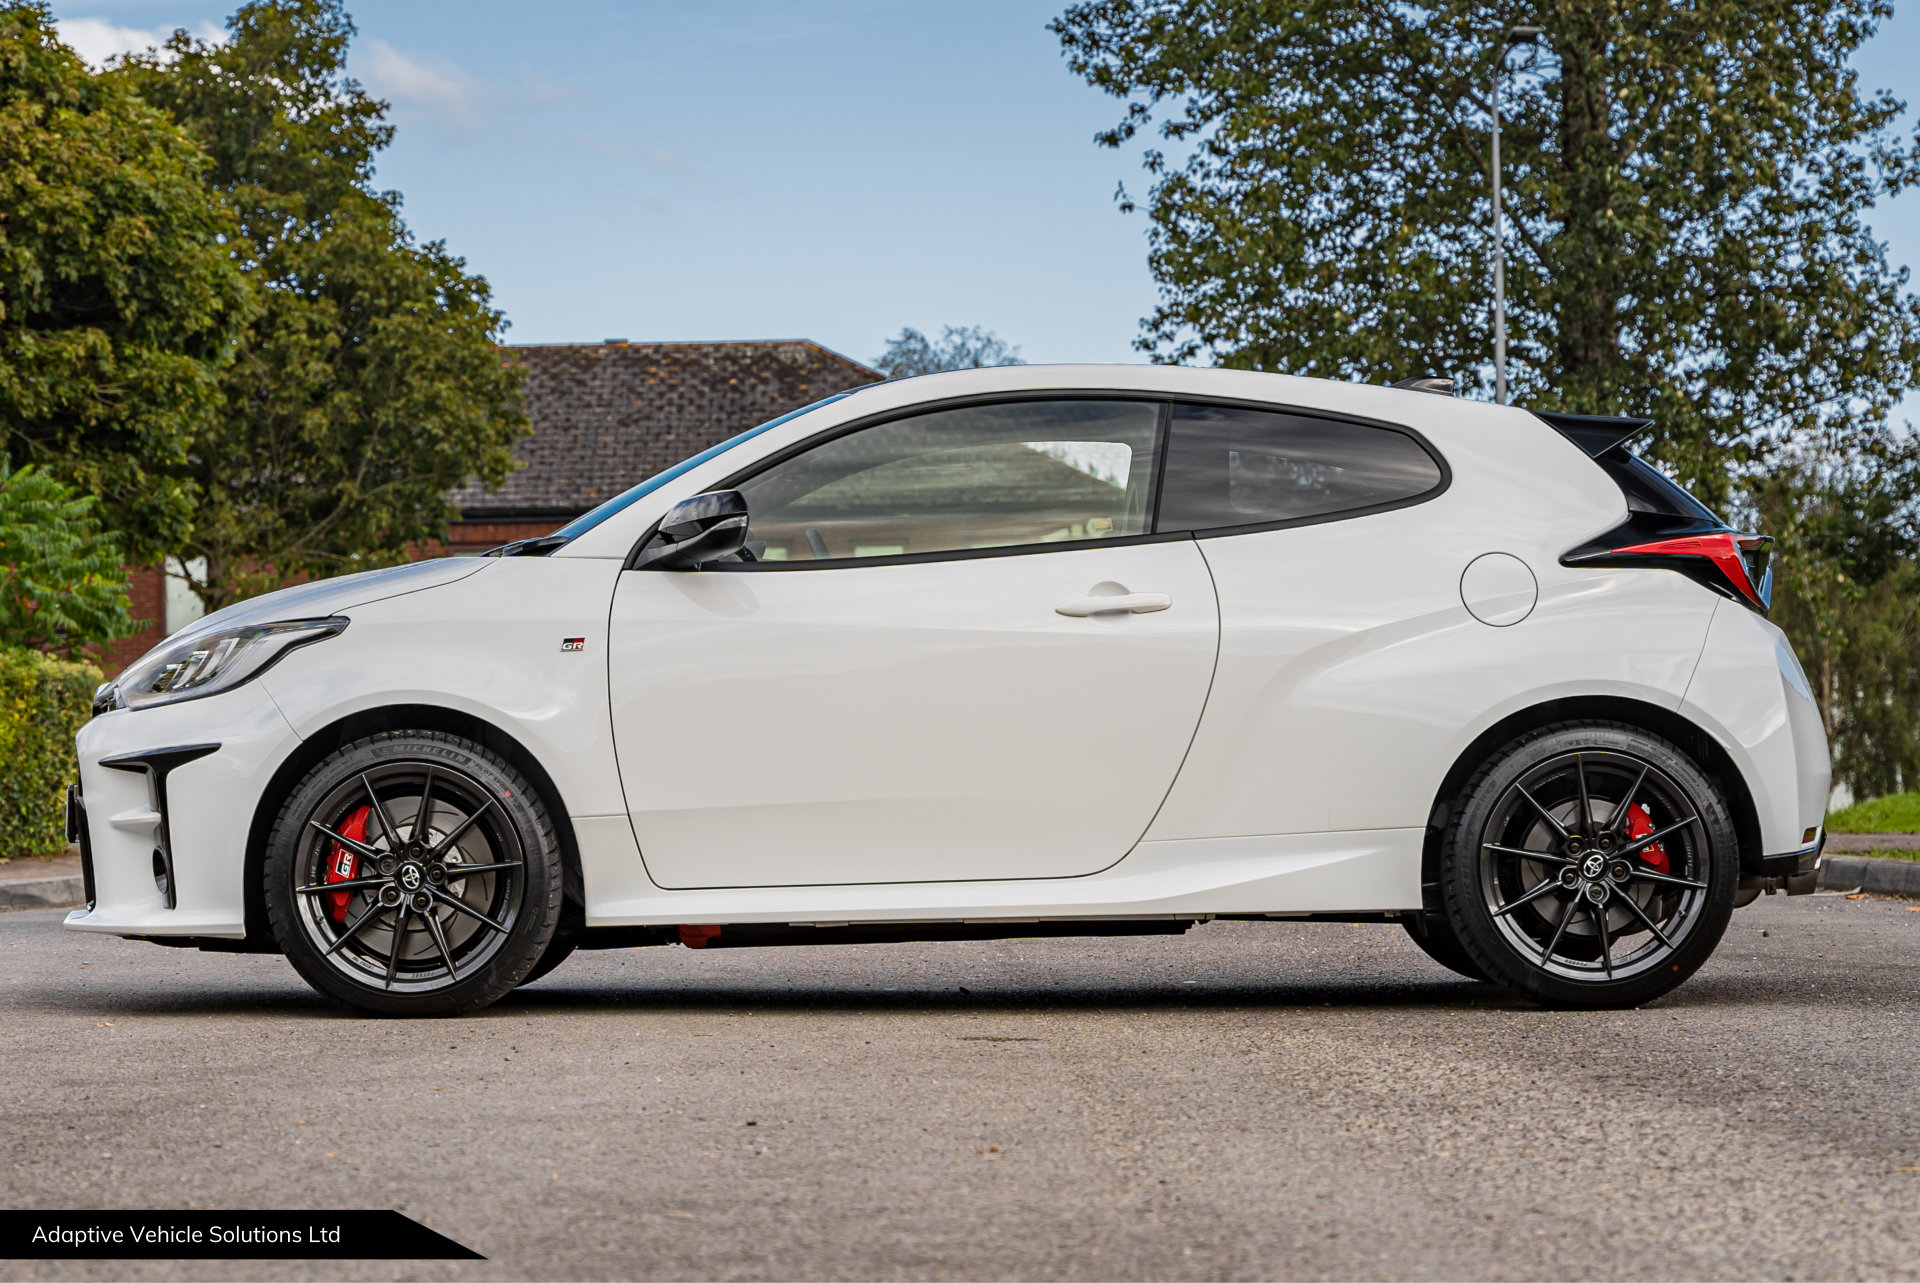 2021 Toyota GR Yaris Circuit Pack Pure White near side view